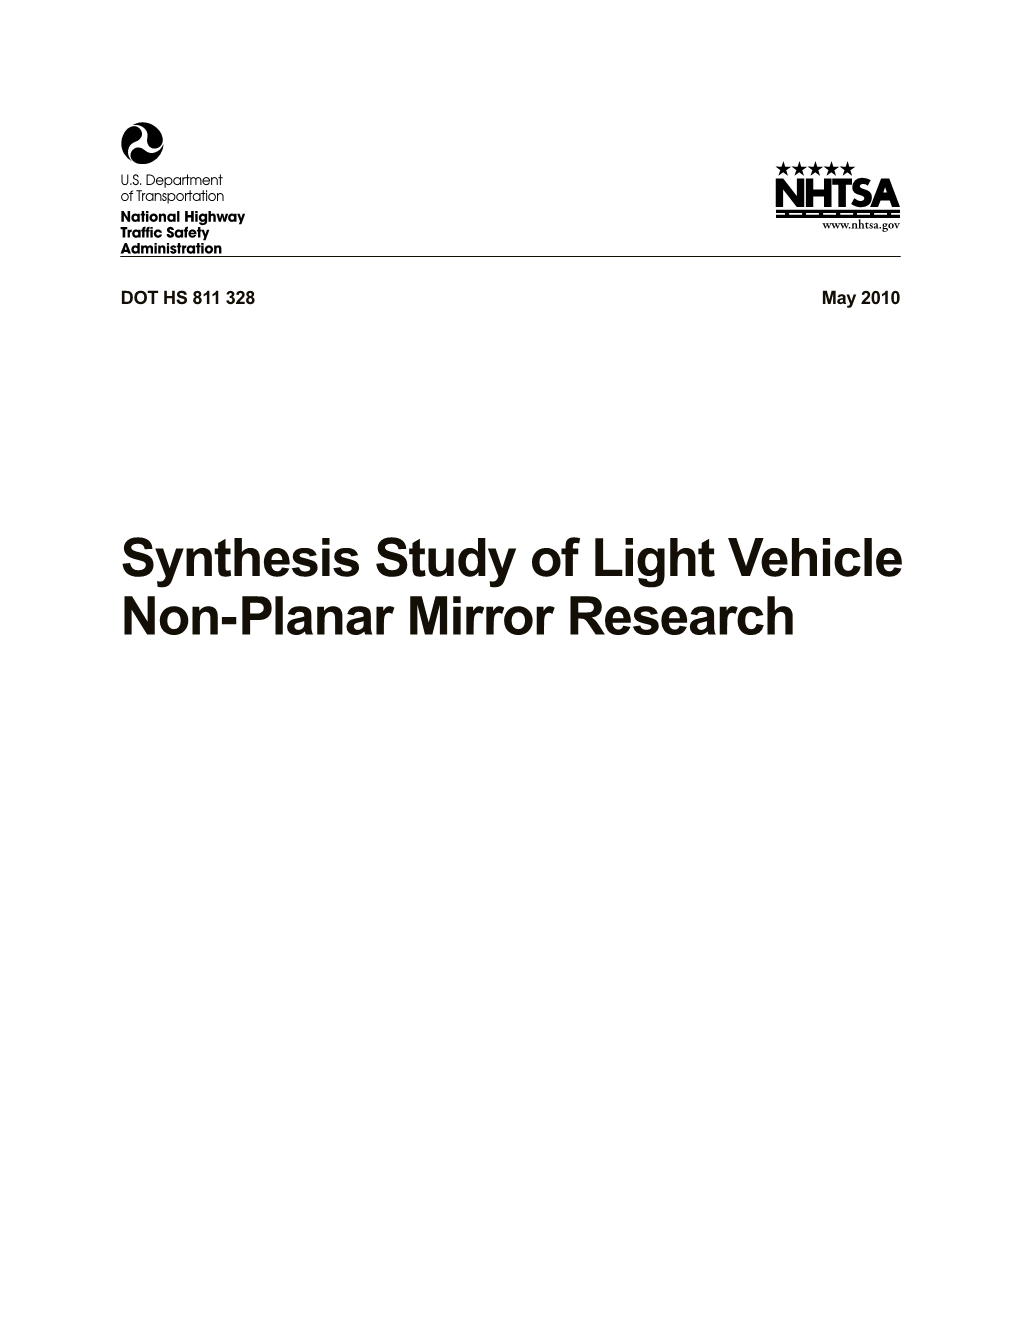 Synthesis Study of Light Vehicle Non-Planar Mirror Research